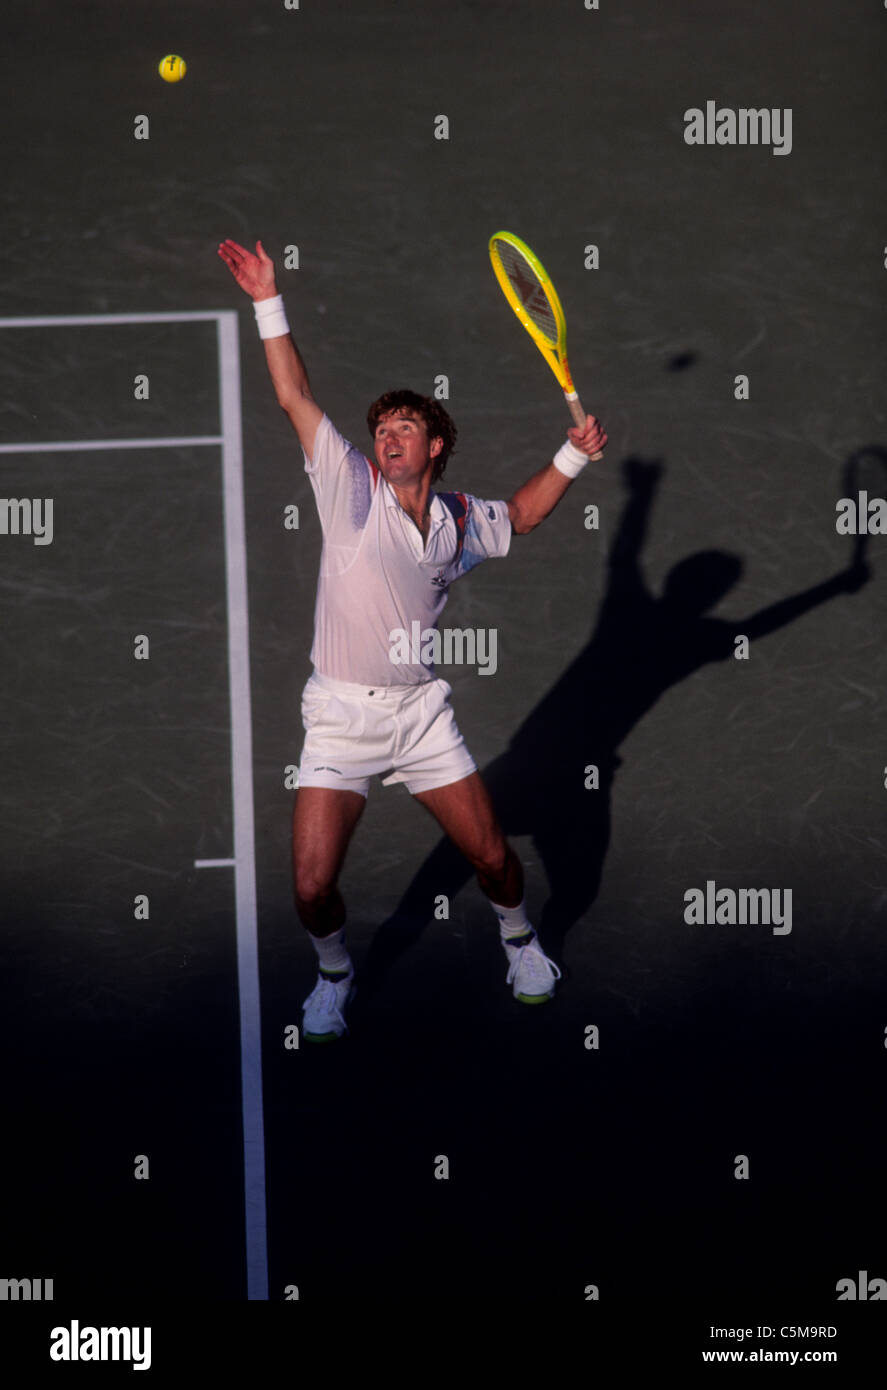 Jimmy Connors (USA) al 1991 US Open Tennis Championships Foto Stock